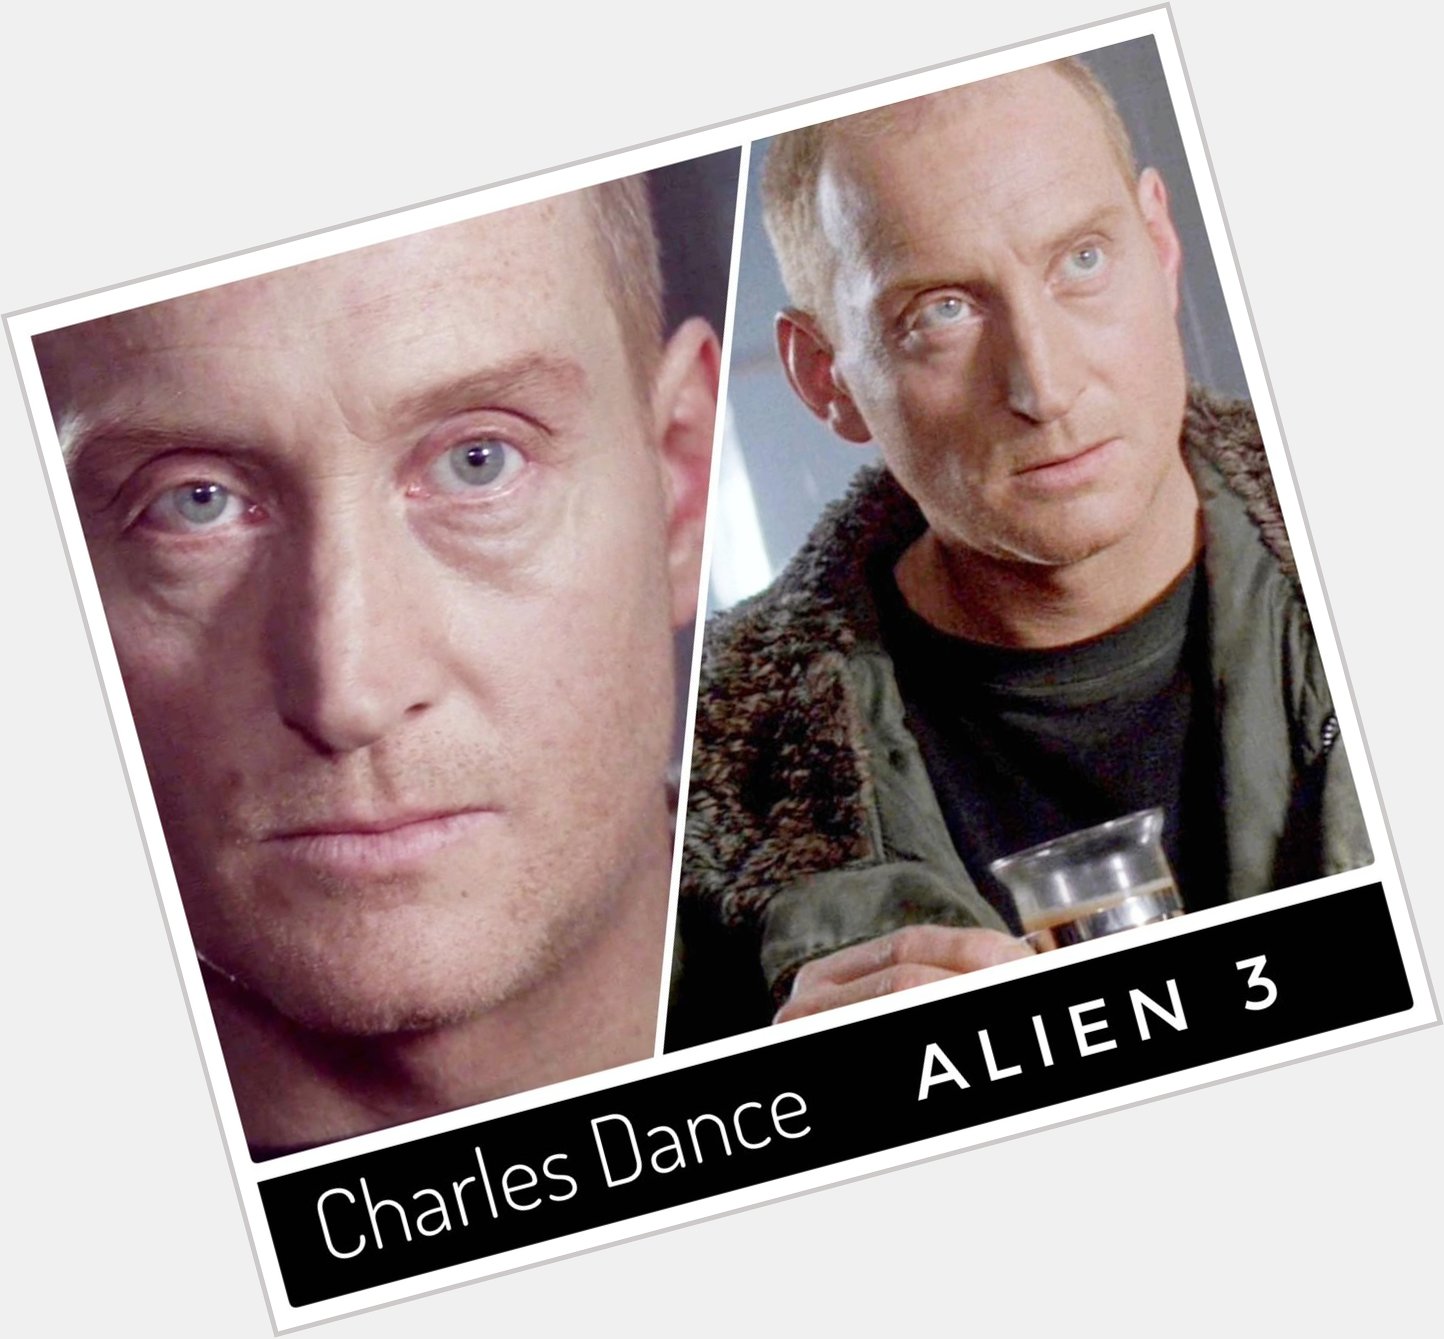 The legendary Charles Dance was born on this day, happy birthday 